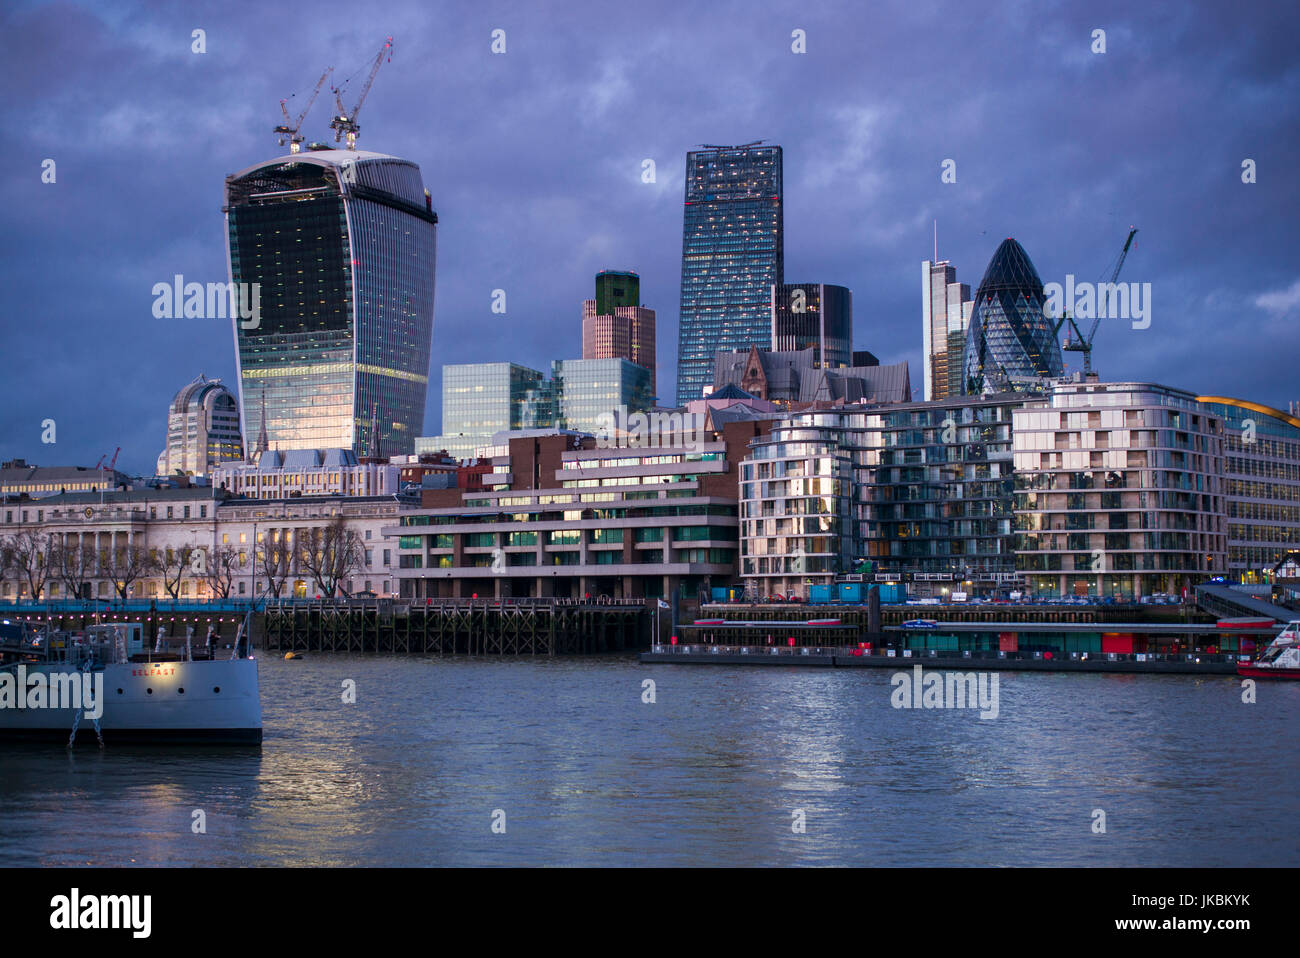 England, London, skyscrapers of The City from the Thames River, dusk Stock Photo